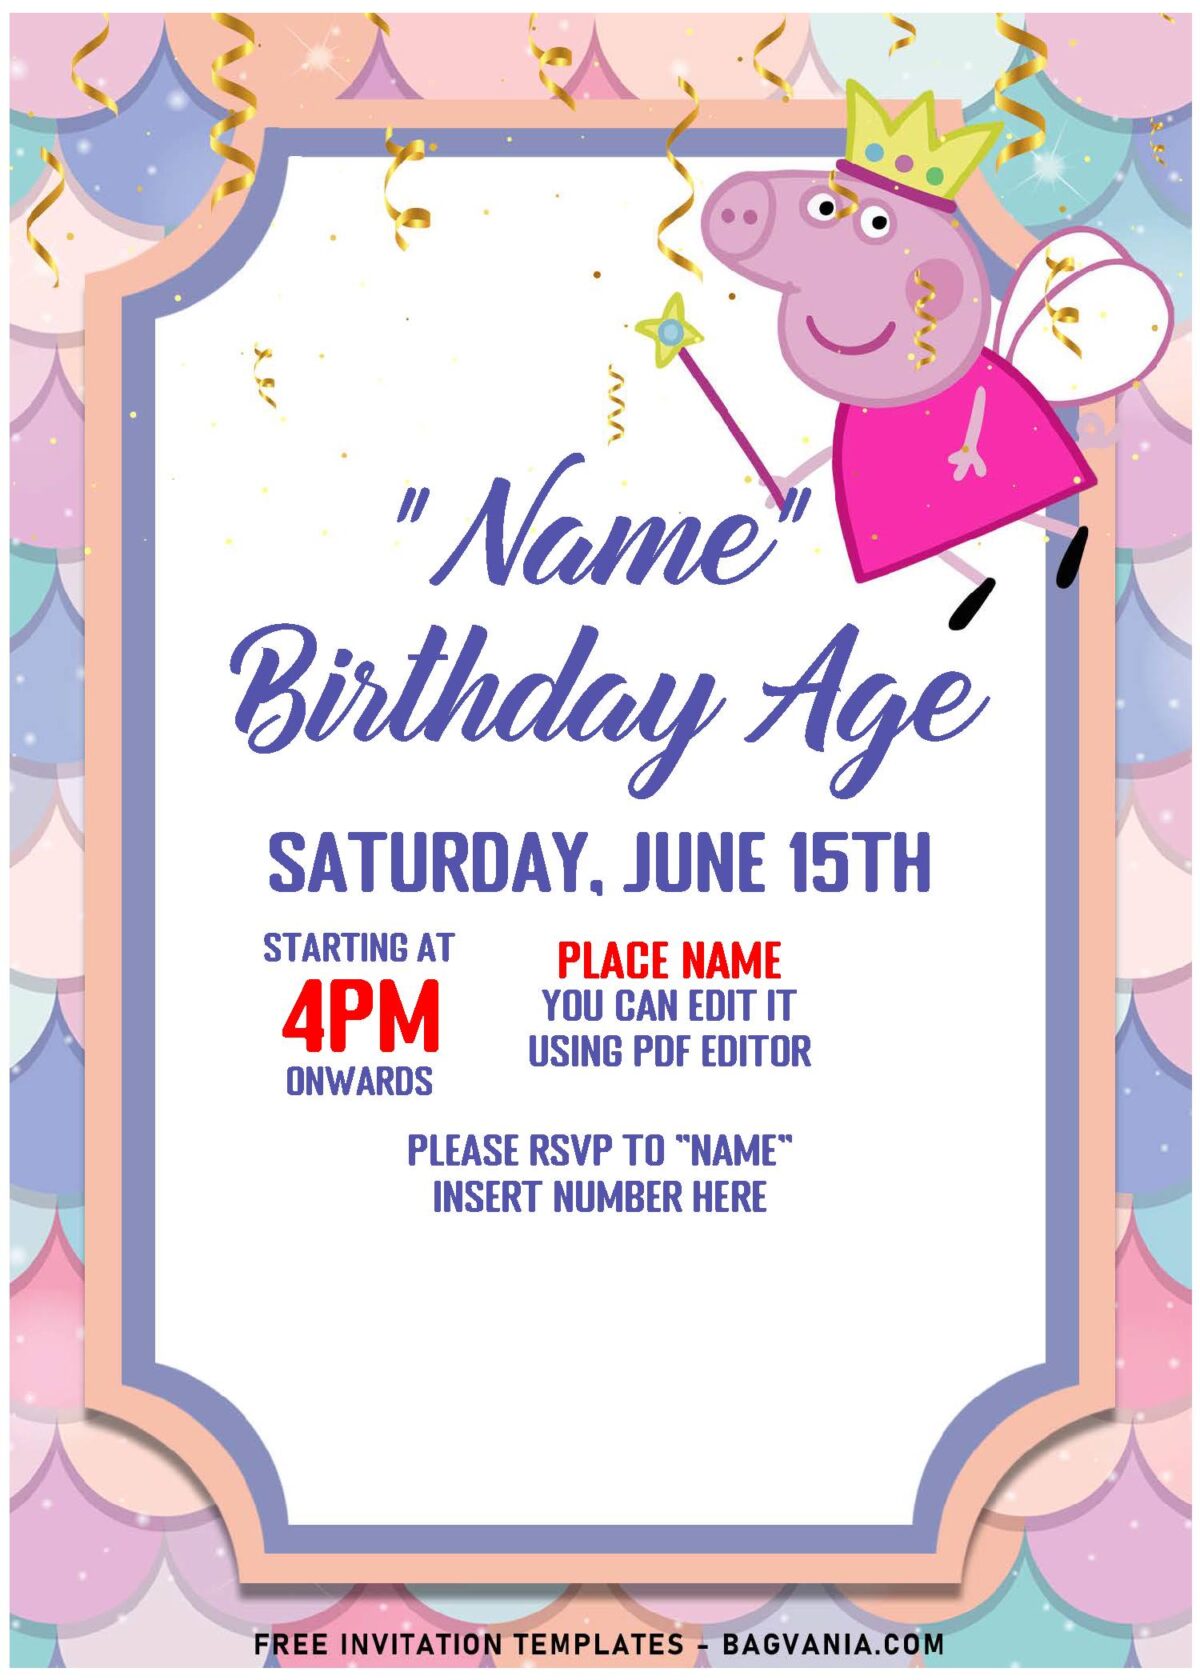 (Free Editable PDF) Peppa Pig Party Time Birthday Invitation Templates with Peppa fairy